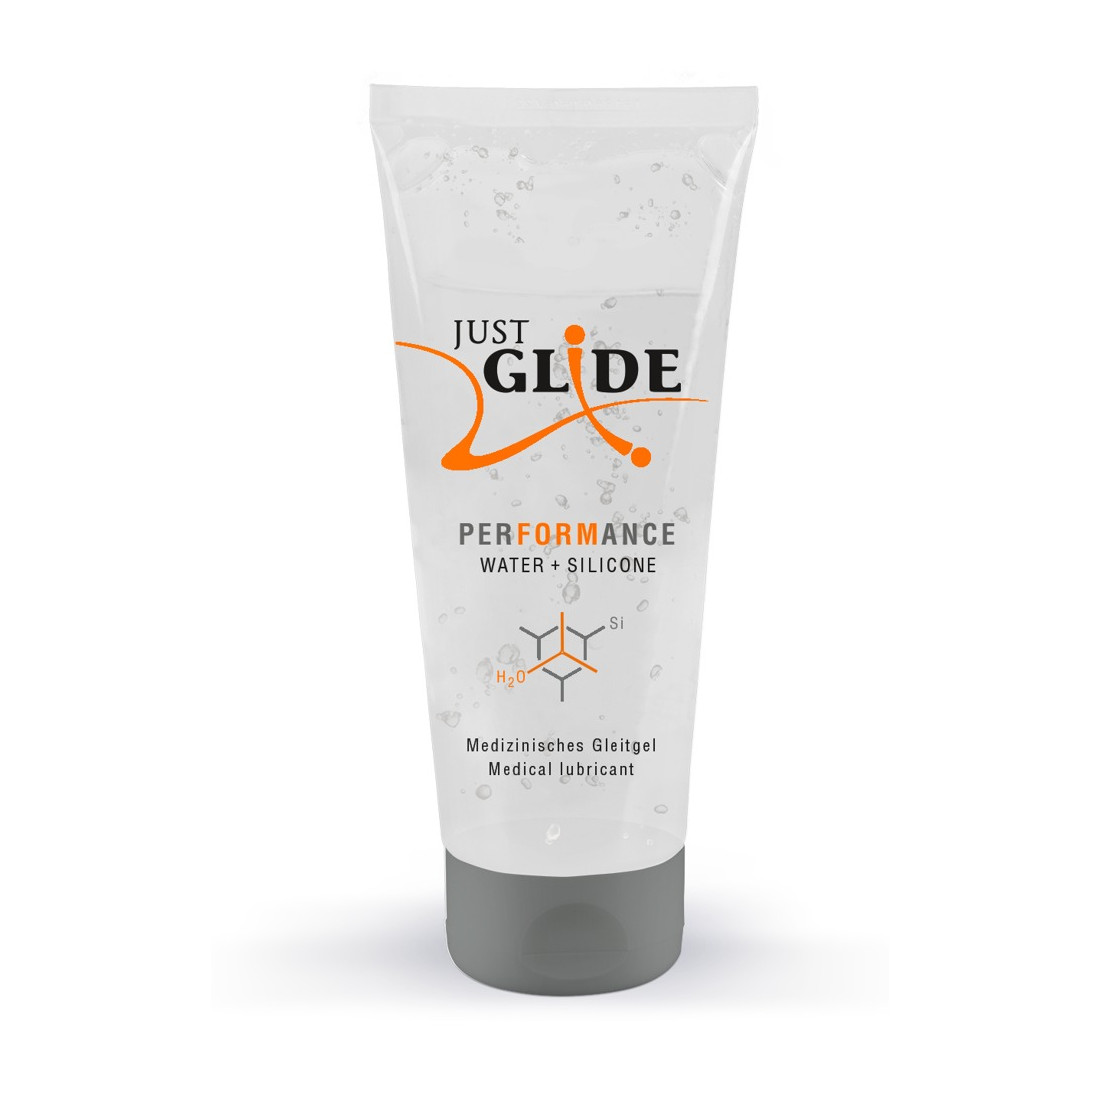 665 Leather Neoprene and Fetish Clothing: Performance by Just Glide 200ml